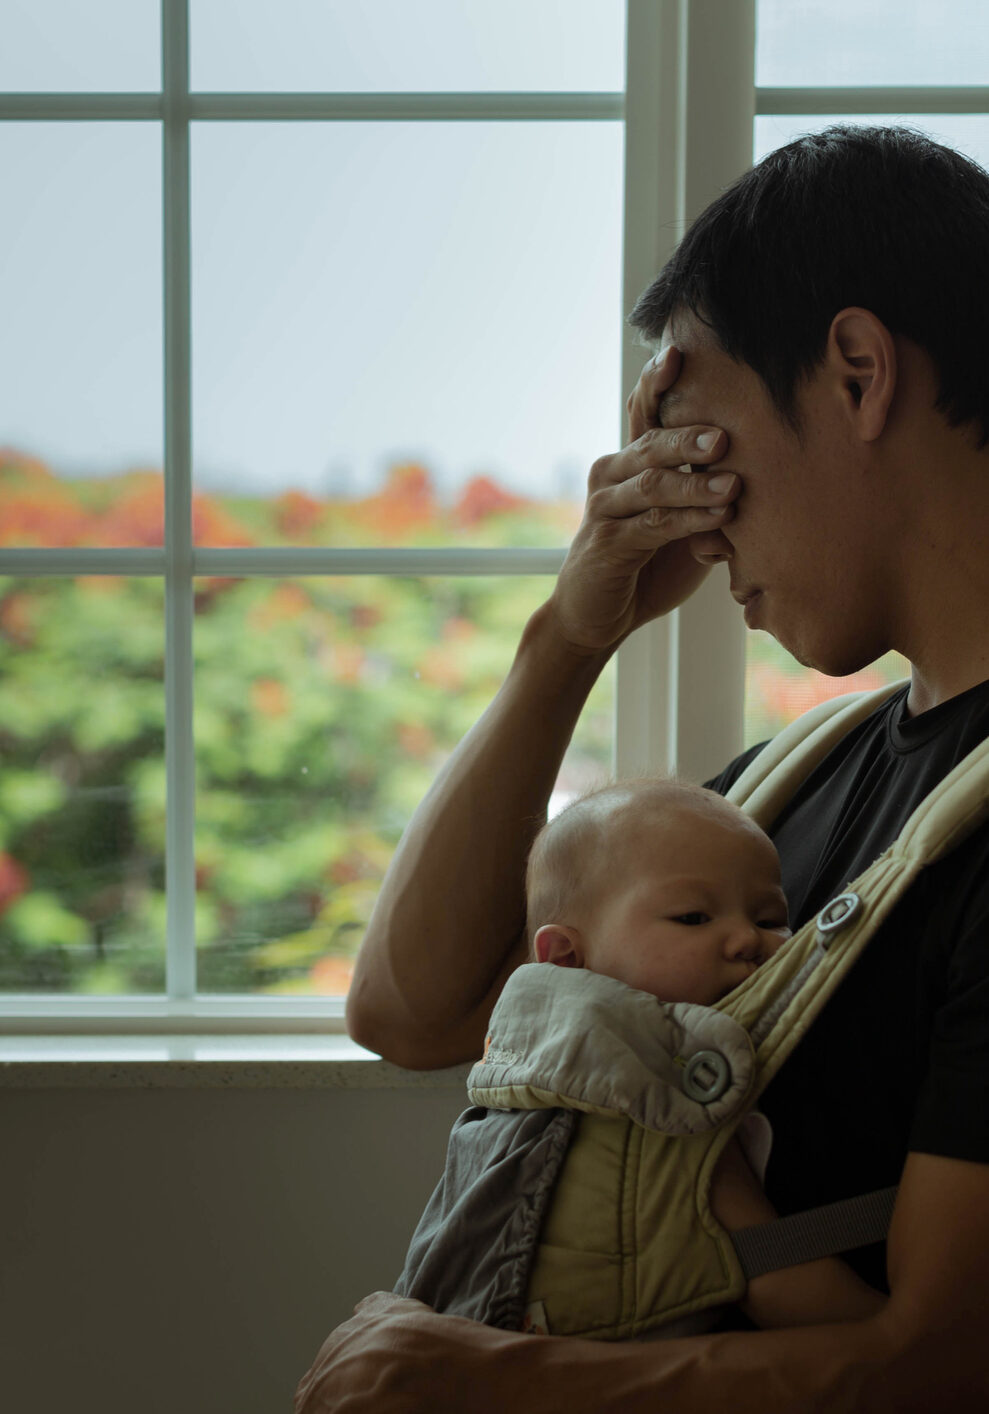 Postpartum depression counseling for men and women